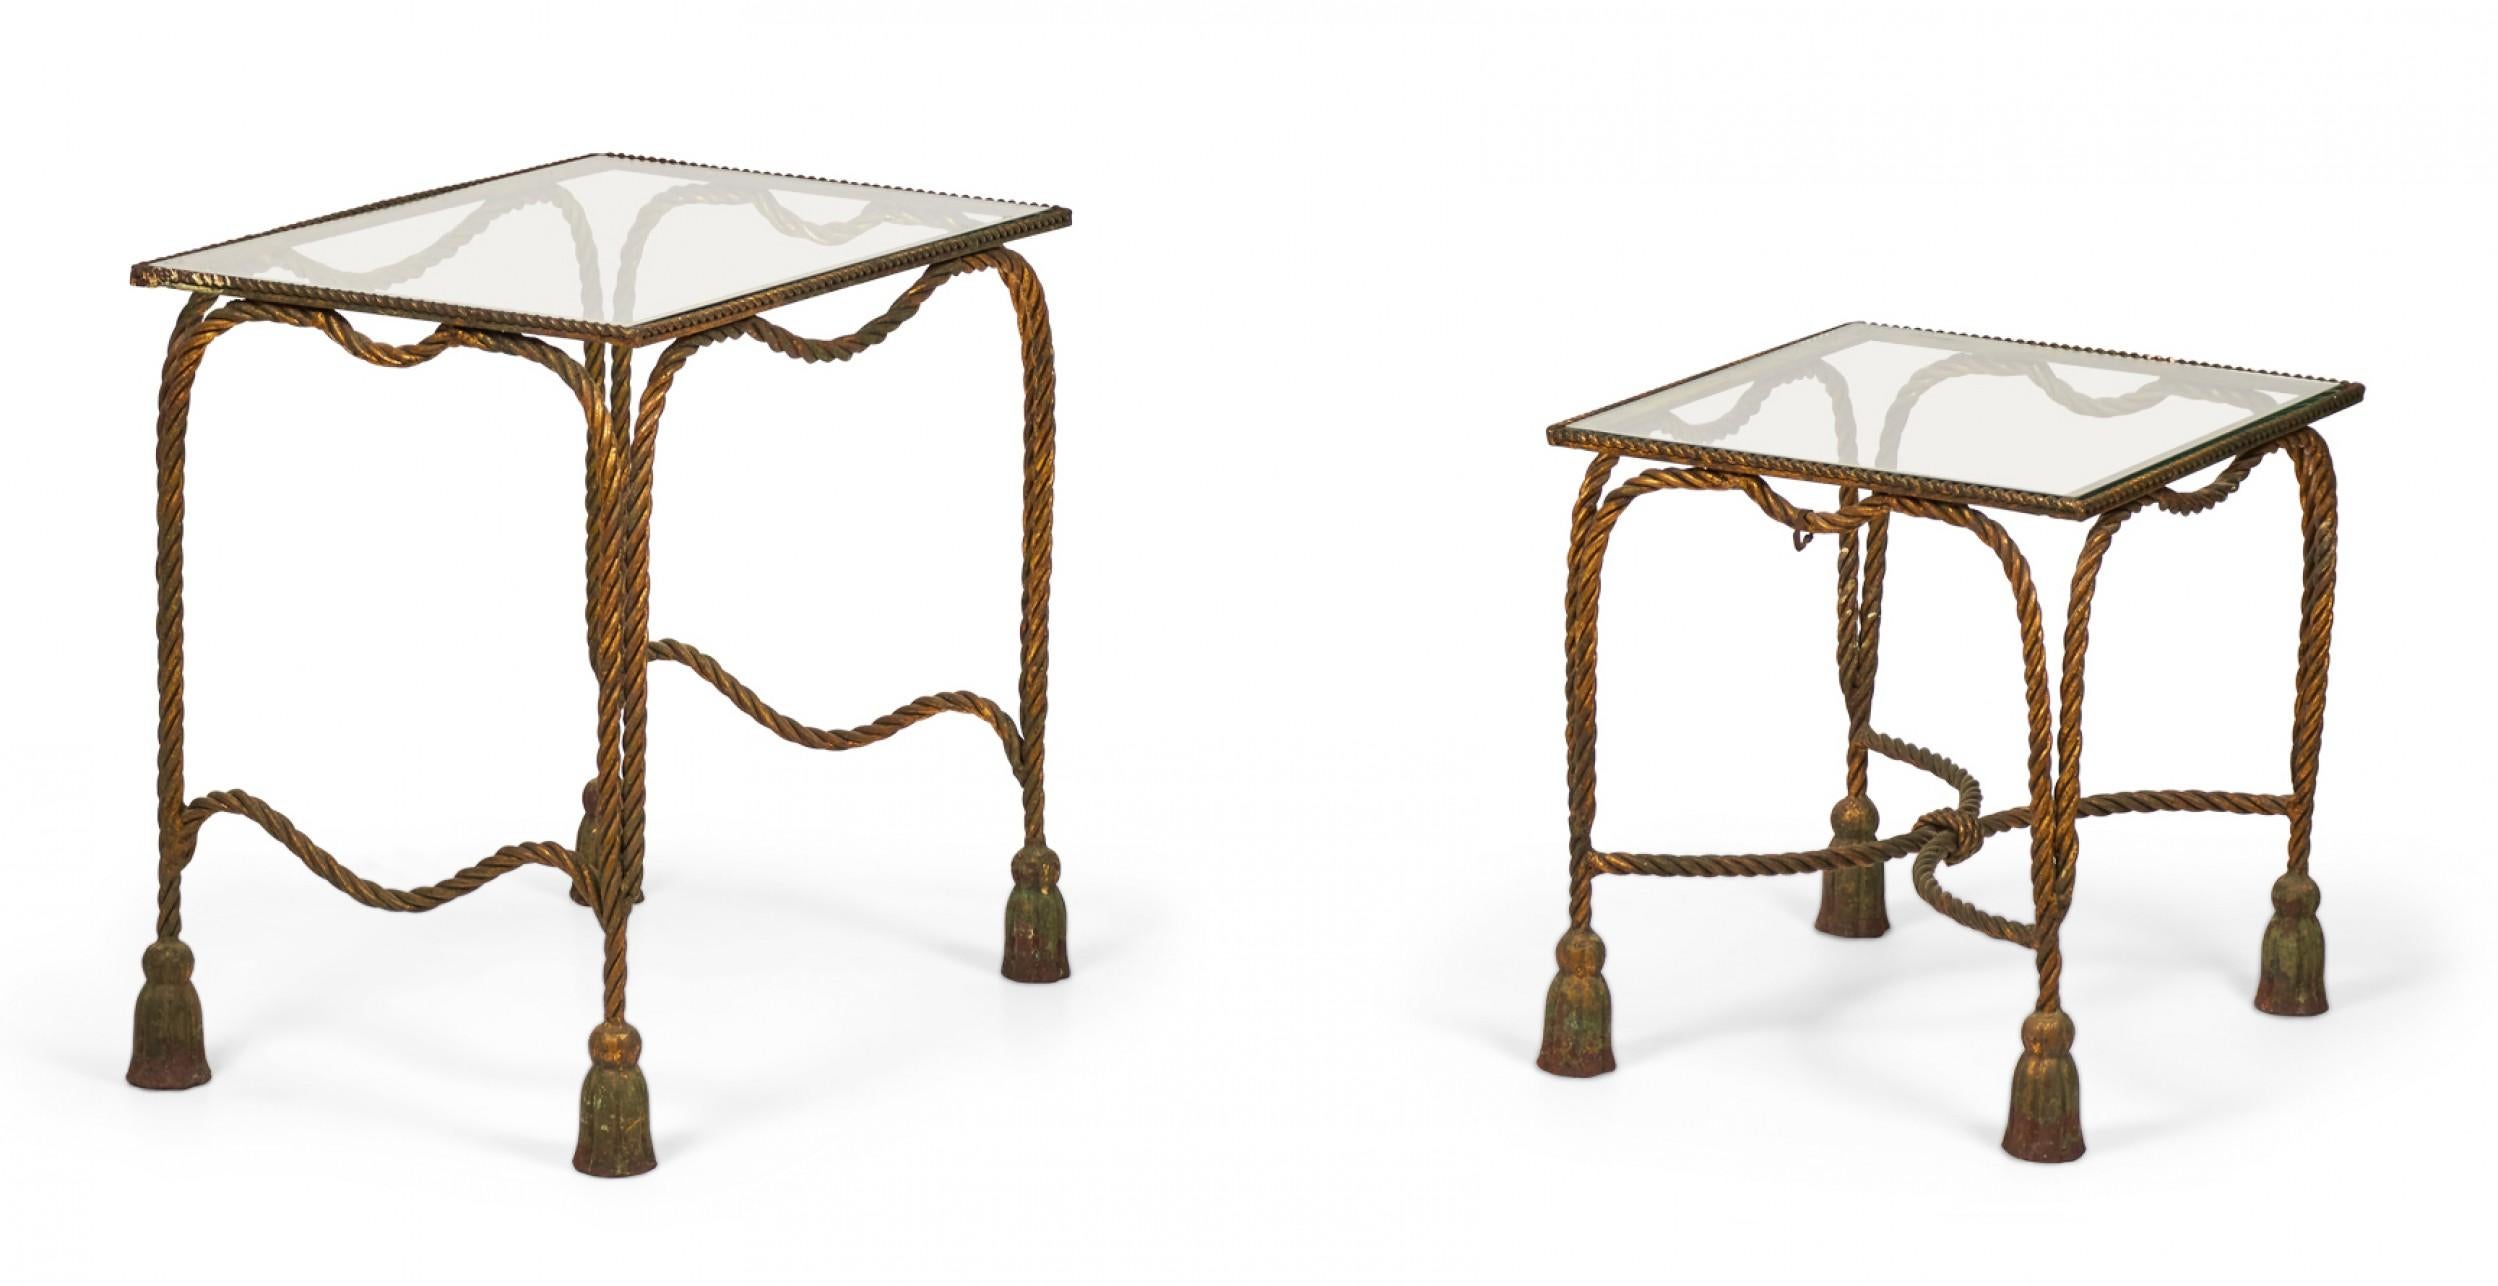 Palladio Italy Baroque Style Rope and Tassel Gilt Iron Nesting Tables In Good Condition For Sale In New York, NY